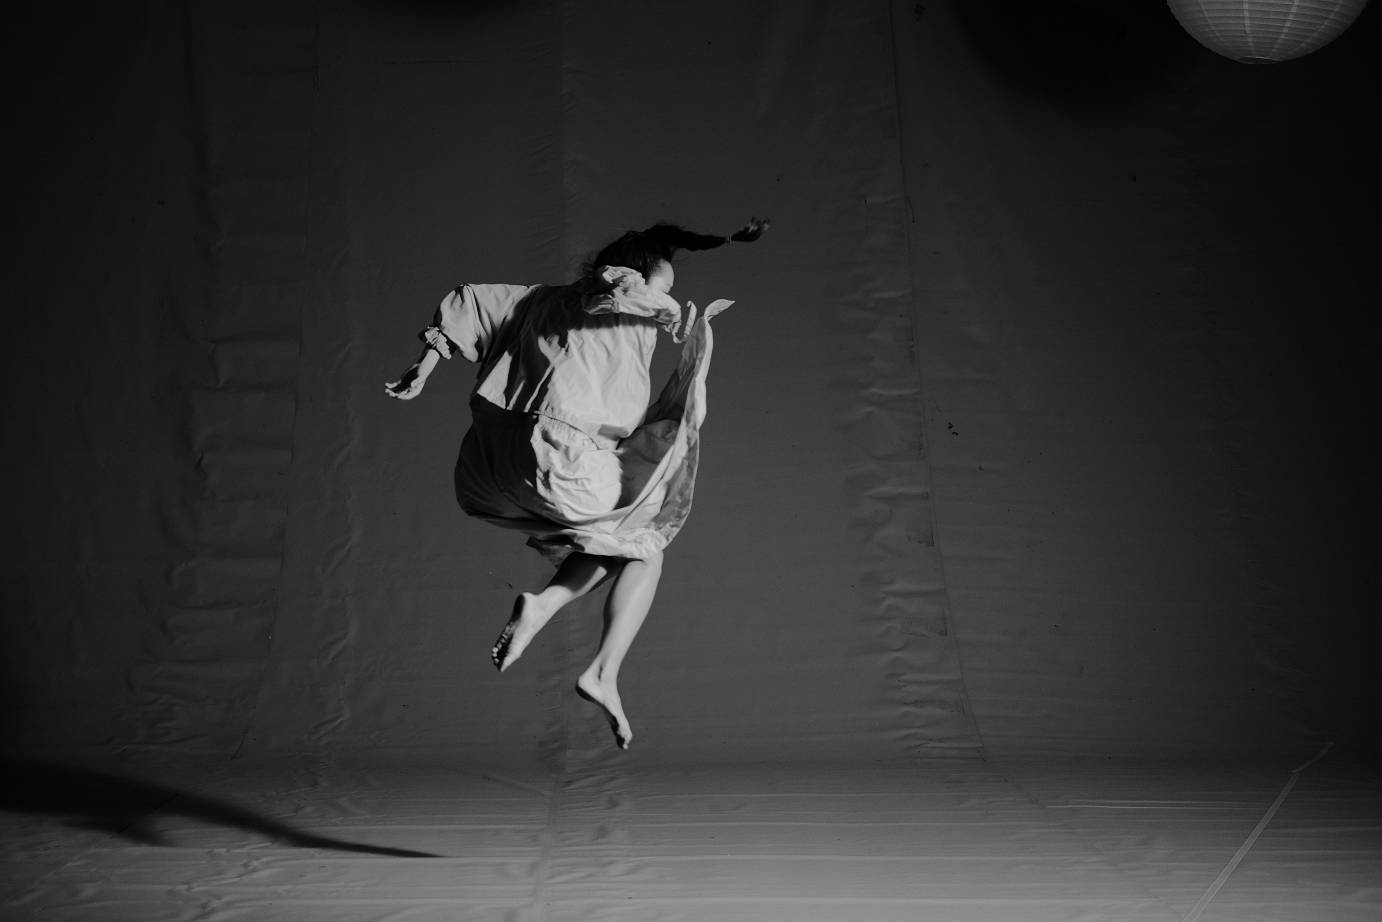 Black and white photo of a girl jumping